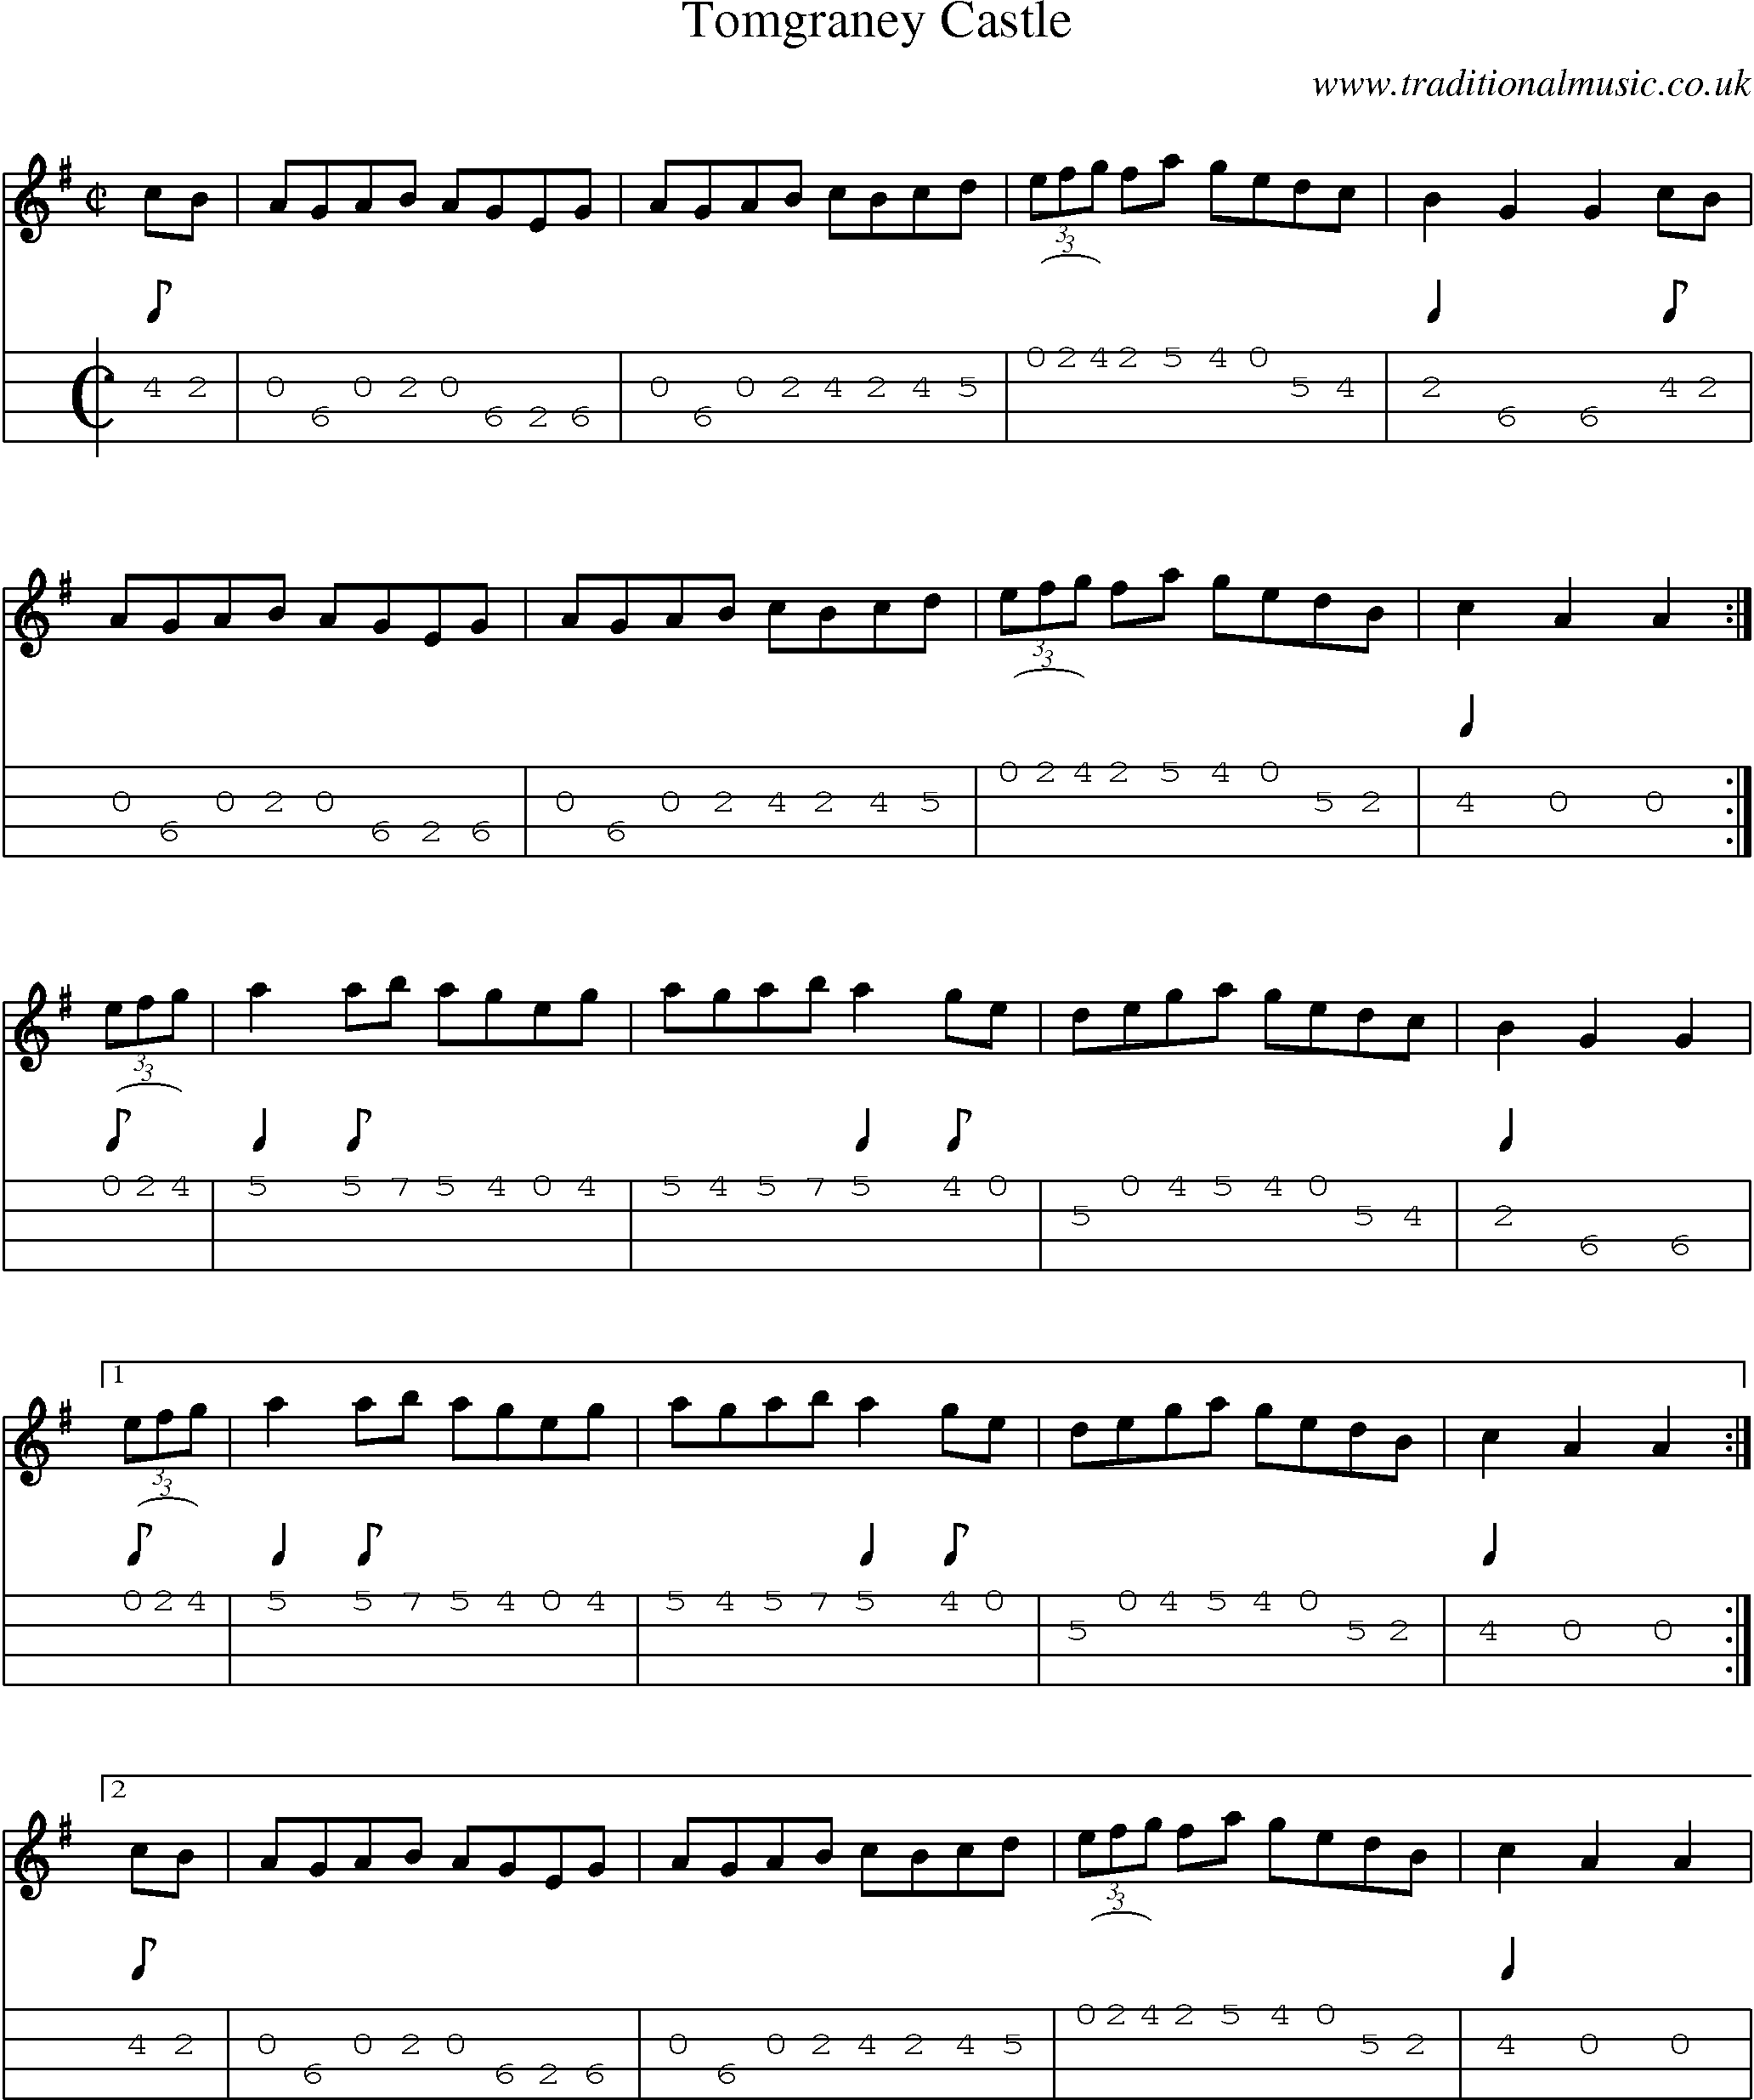 Music Score and Mandolin Tabs for Tomgraney Castle